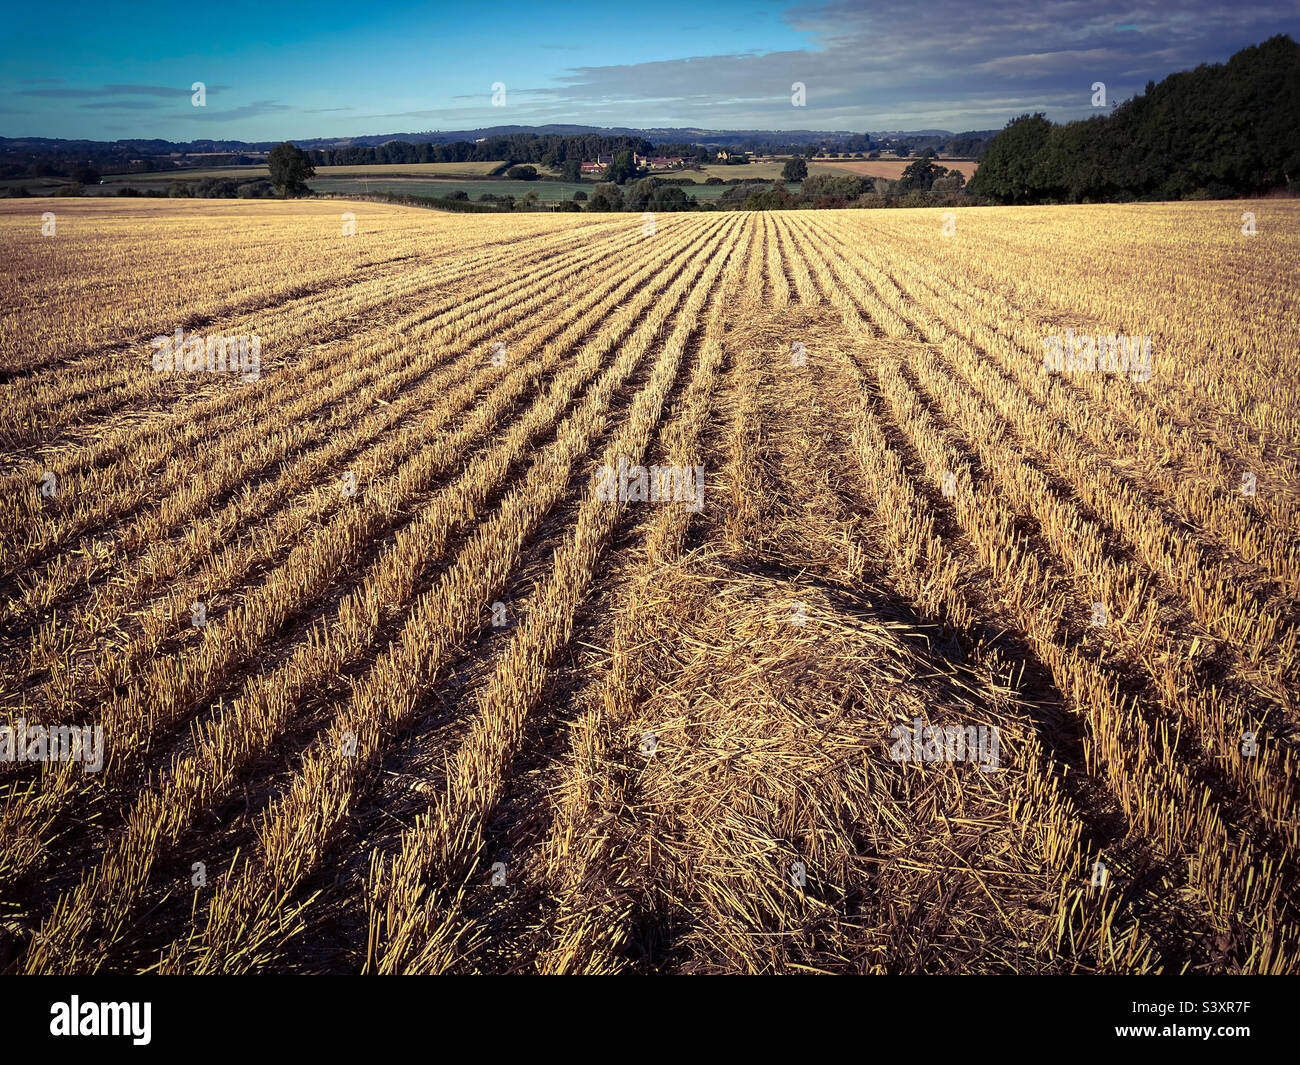 Agricultural landscape, view to distant hills over stubble field with hay bales, Somerset, England Stock Photo